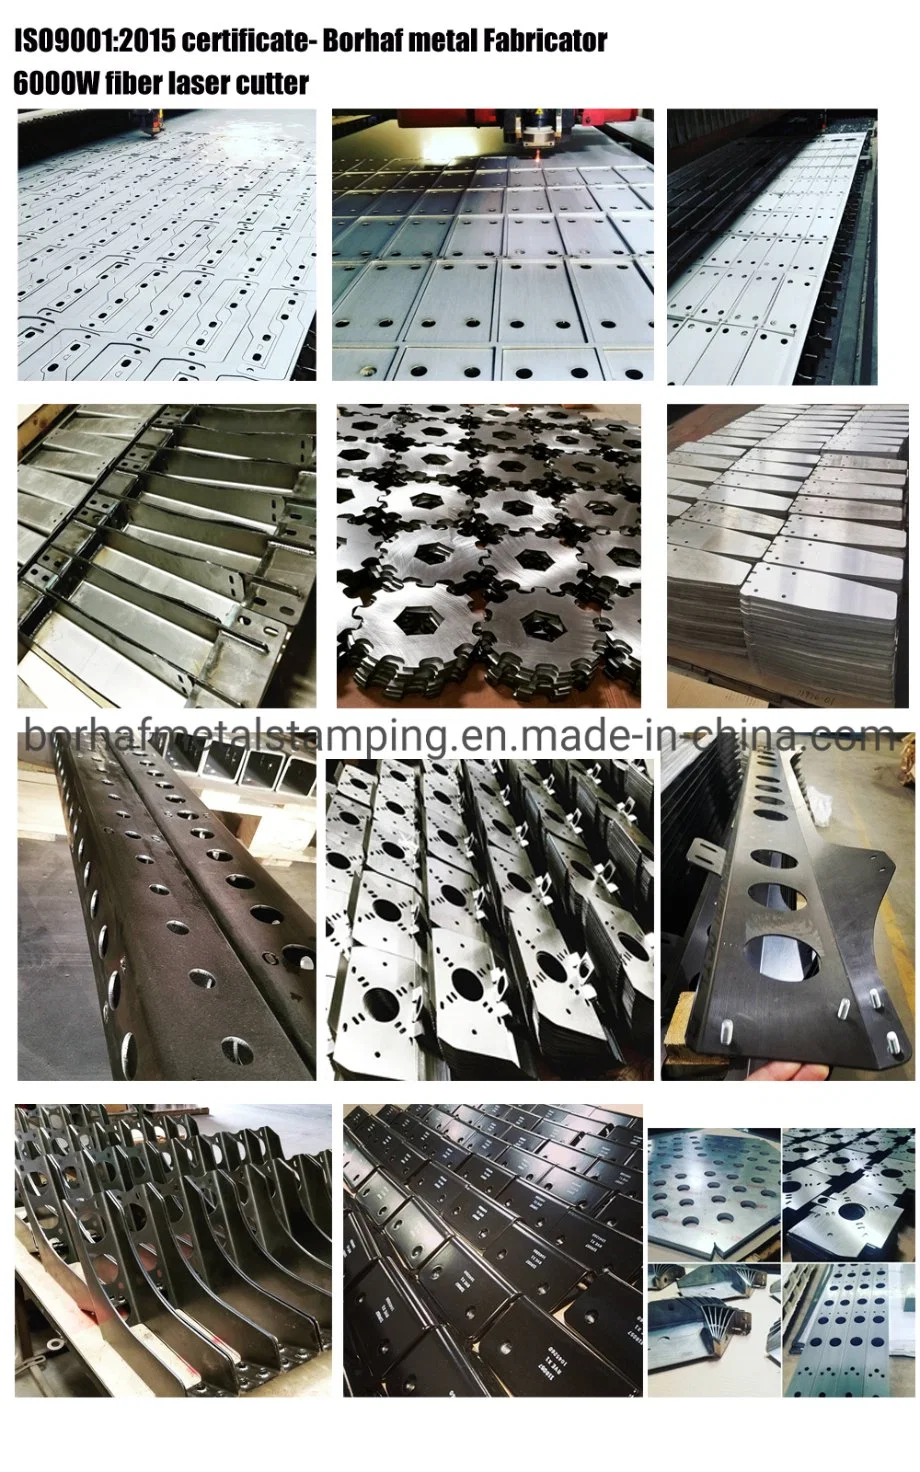 Chinese Manufacturer Laser Cutting, Turret Punching, Forming, Welding, Finishing and Assembly of Various Custom Sheet Metal Structural Steel Fabricated Parts